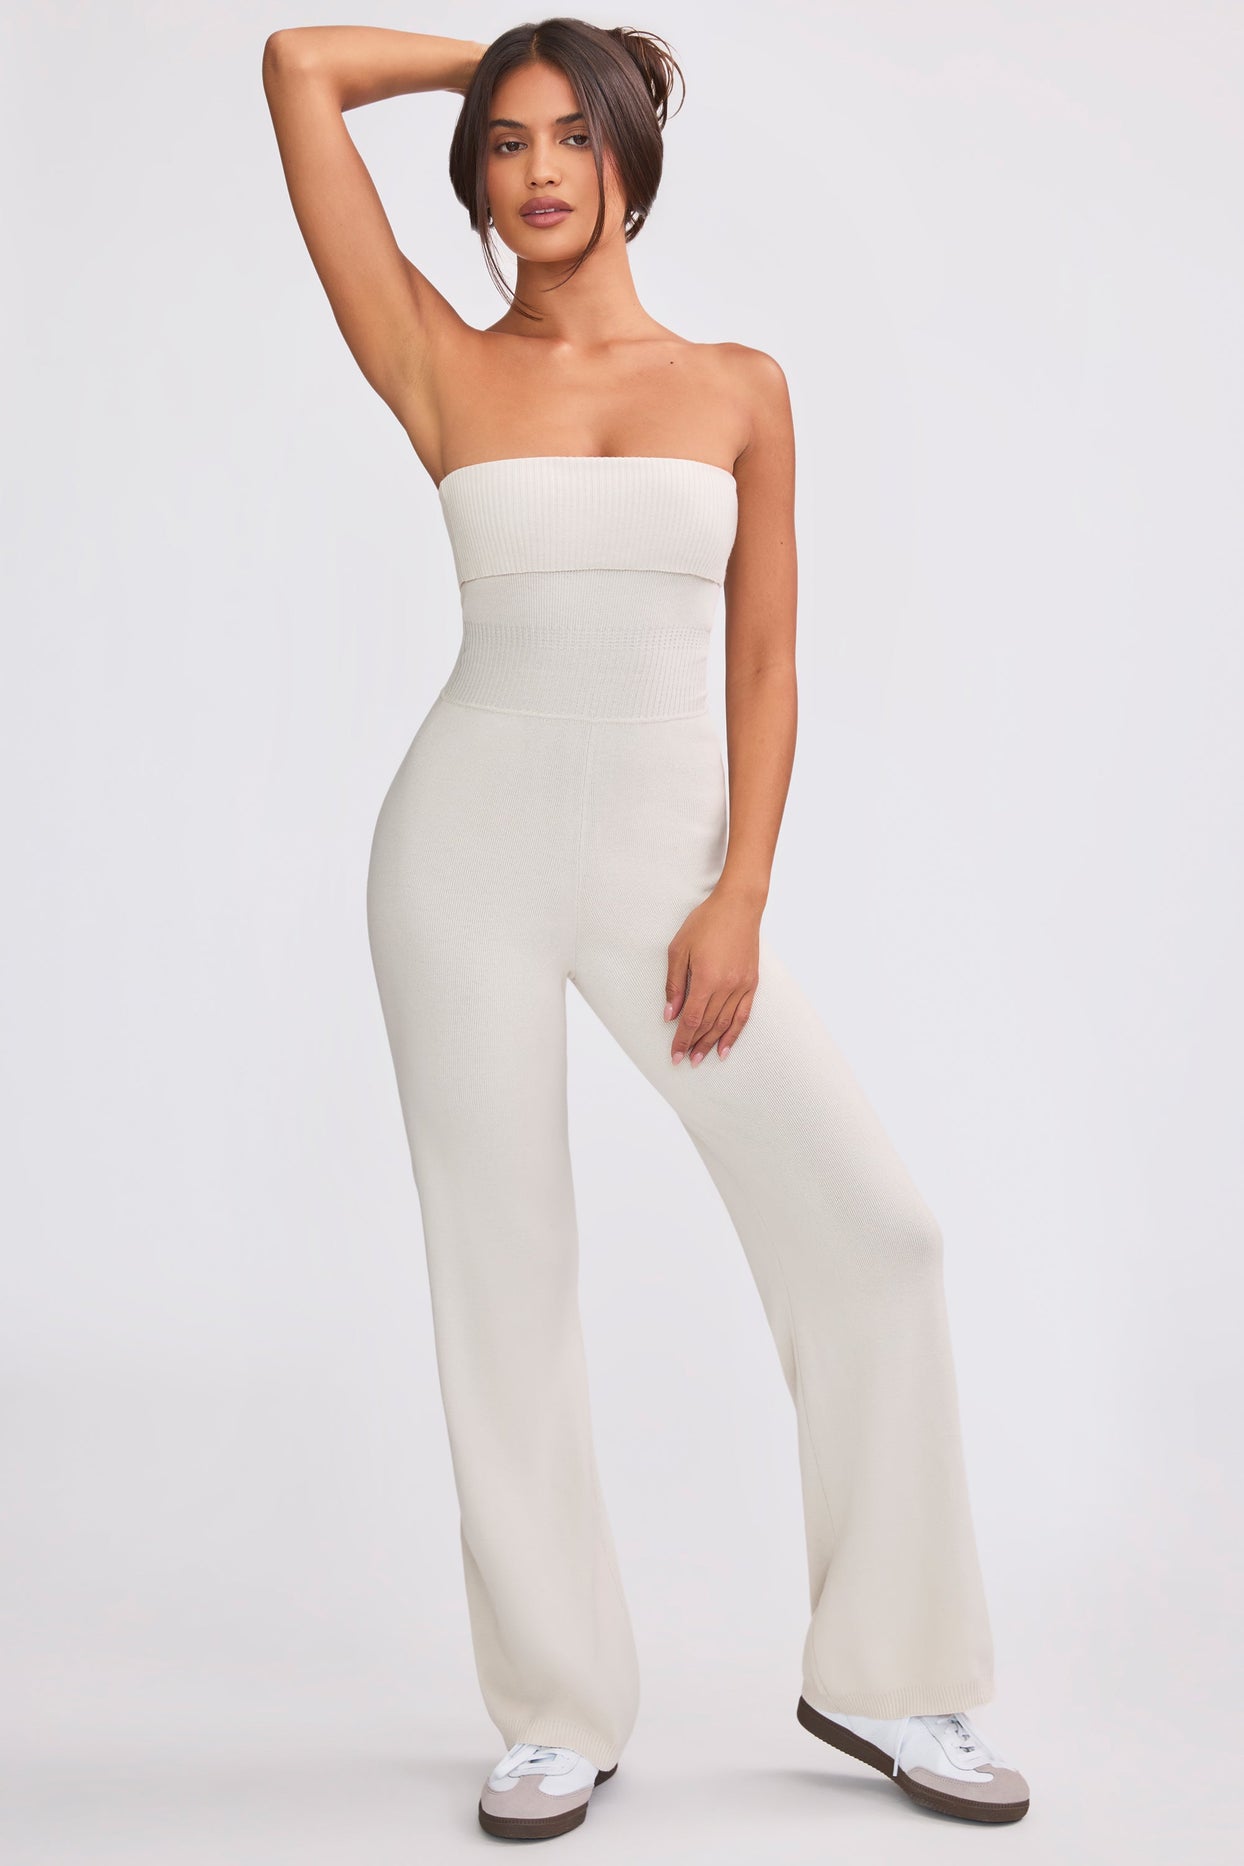 Bandeau Kick Flare Chunky Knit Jumpsuit in Cream